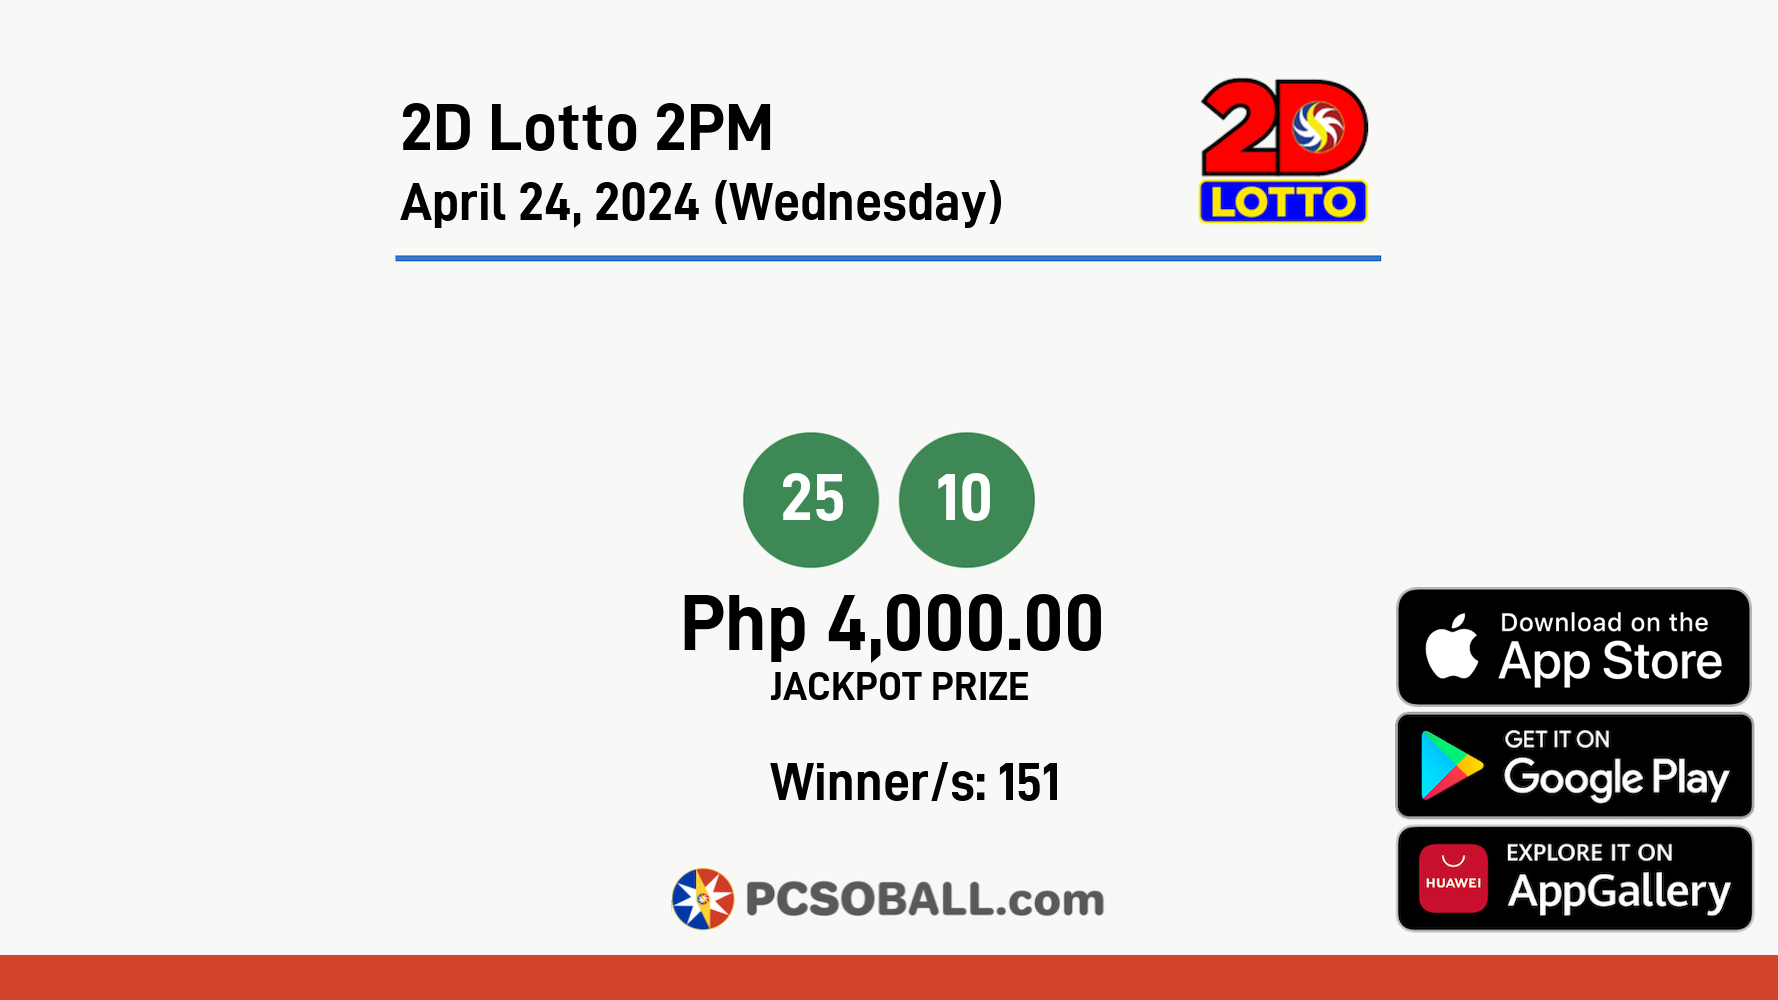 2D Lotto 2PM April 24, 2024 (Wednesday) Result